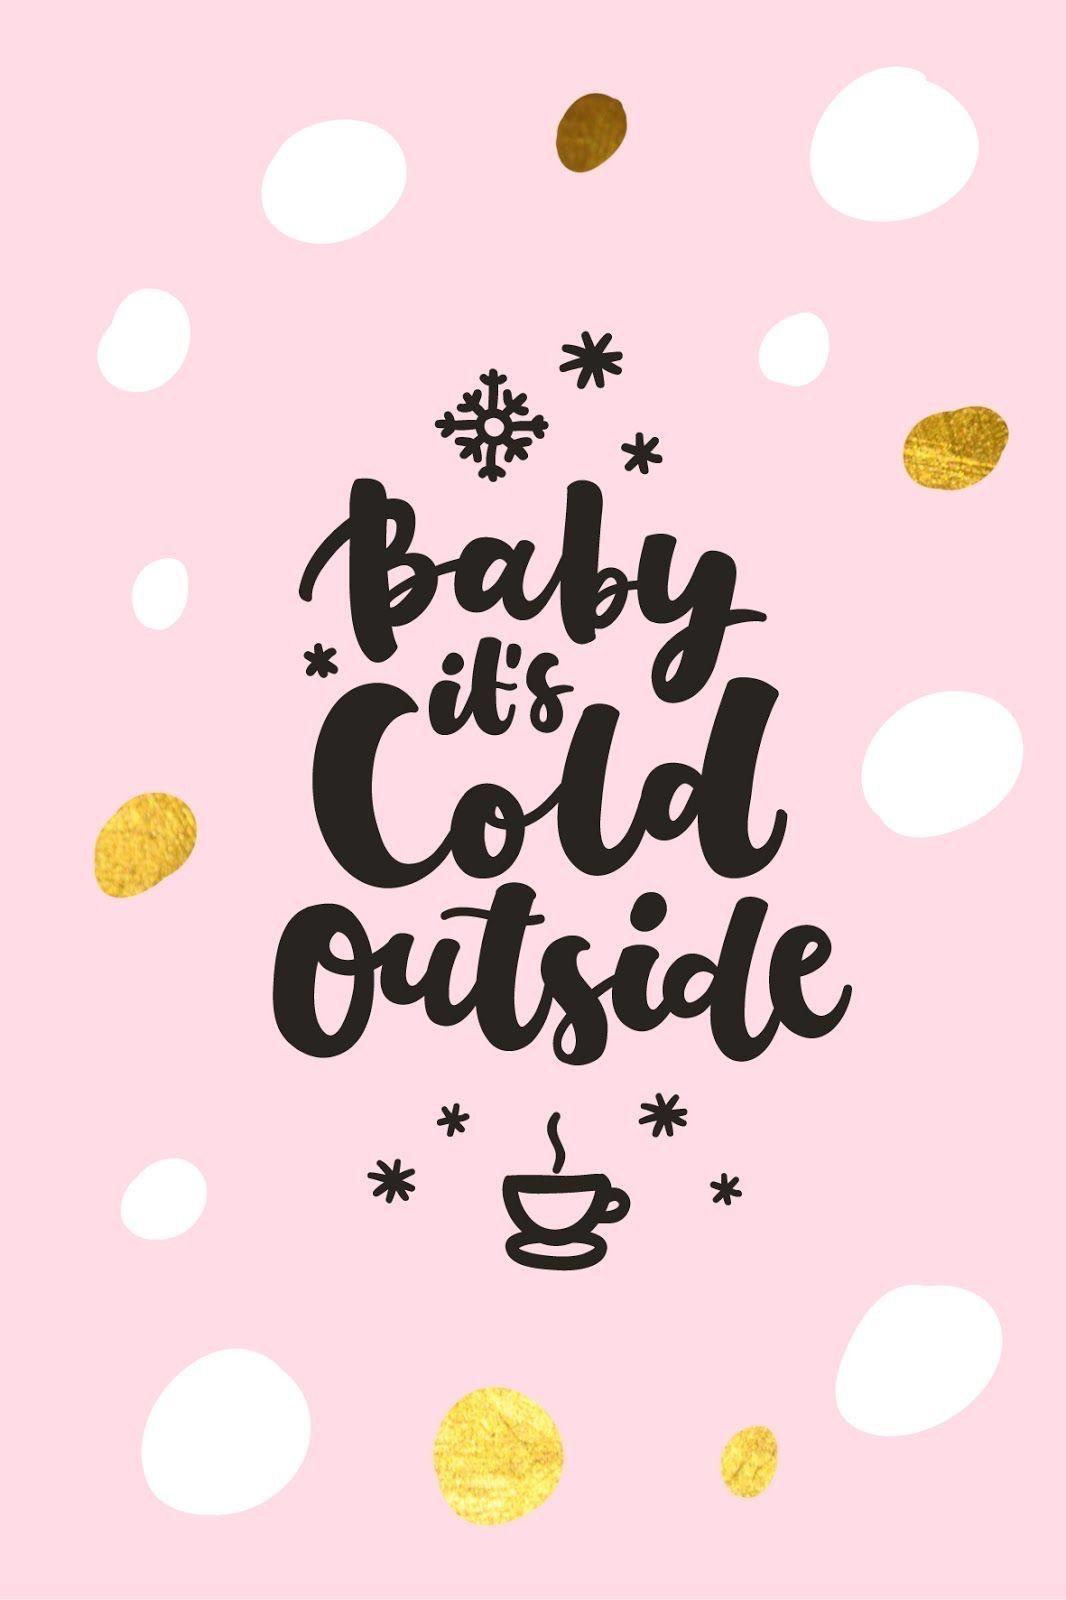 Baby it's cold outside. status. Christmas wallpaper